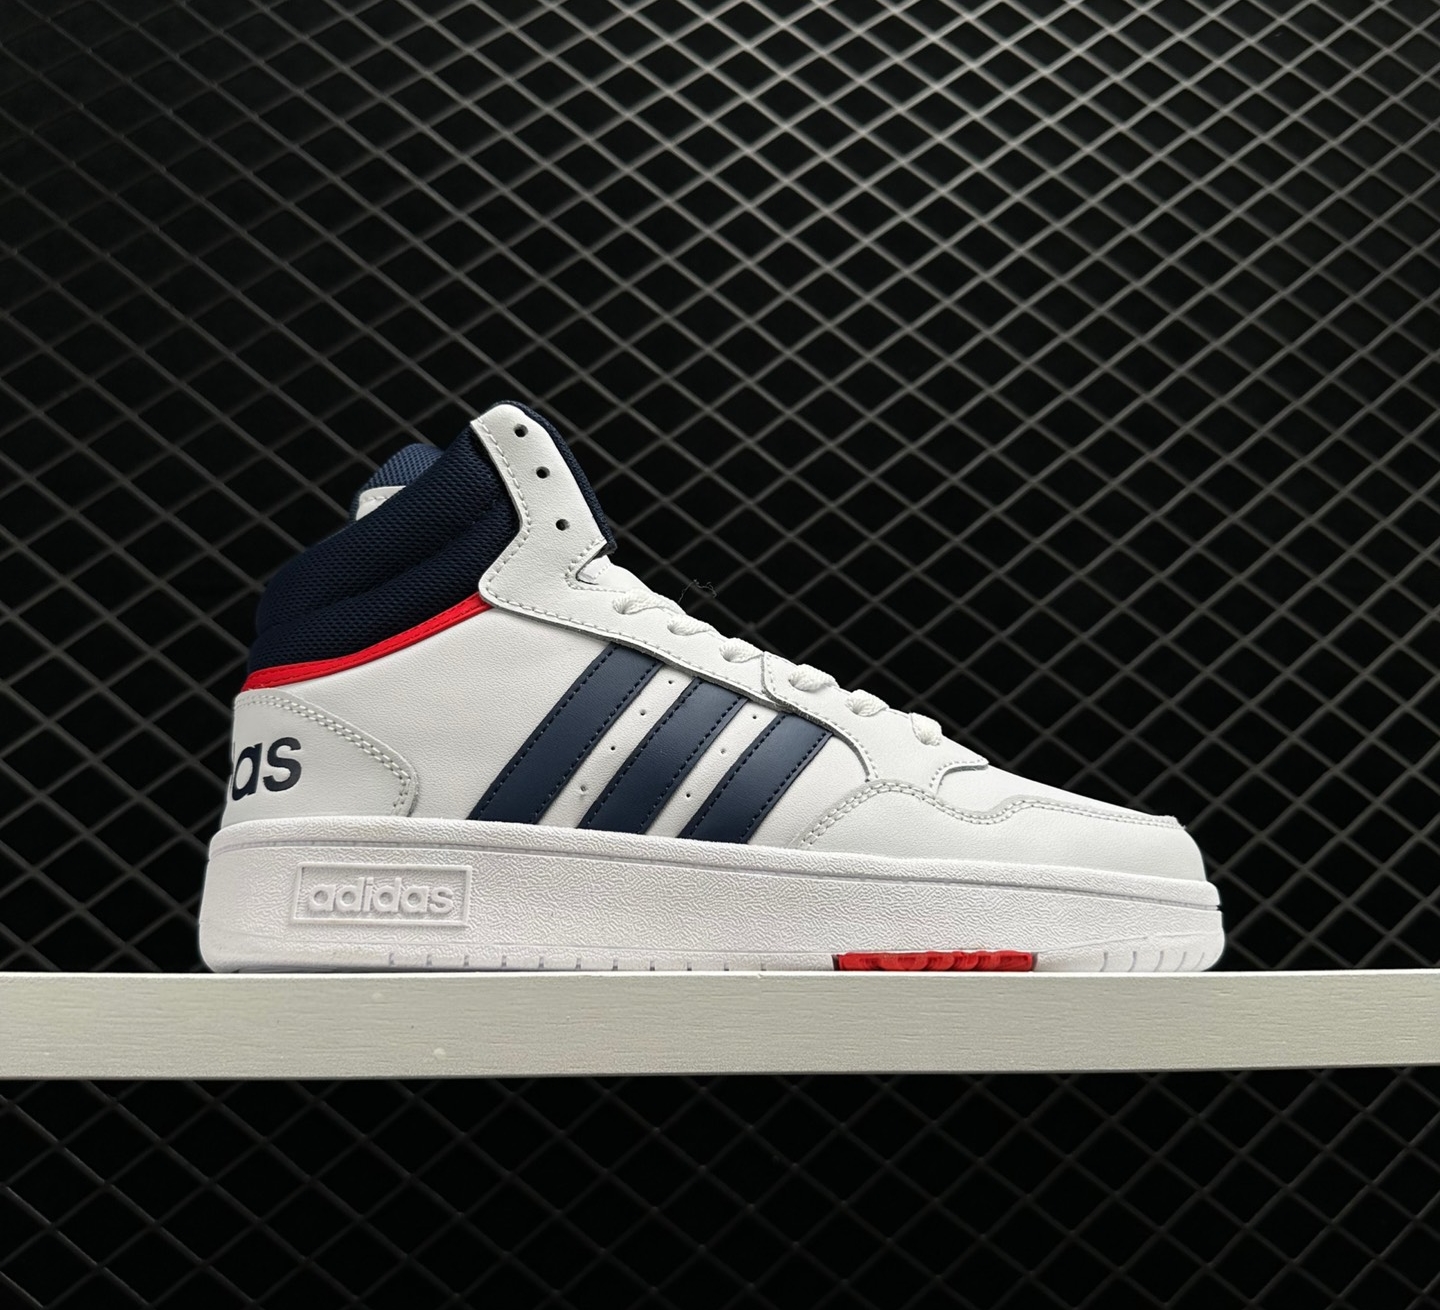 Adidas Hoops 3.0 White Navy Red GY5543 - Perfect Athletic Sneakers for Style and Performance